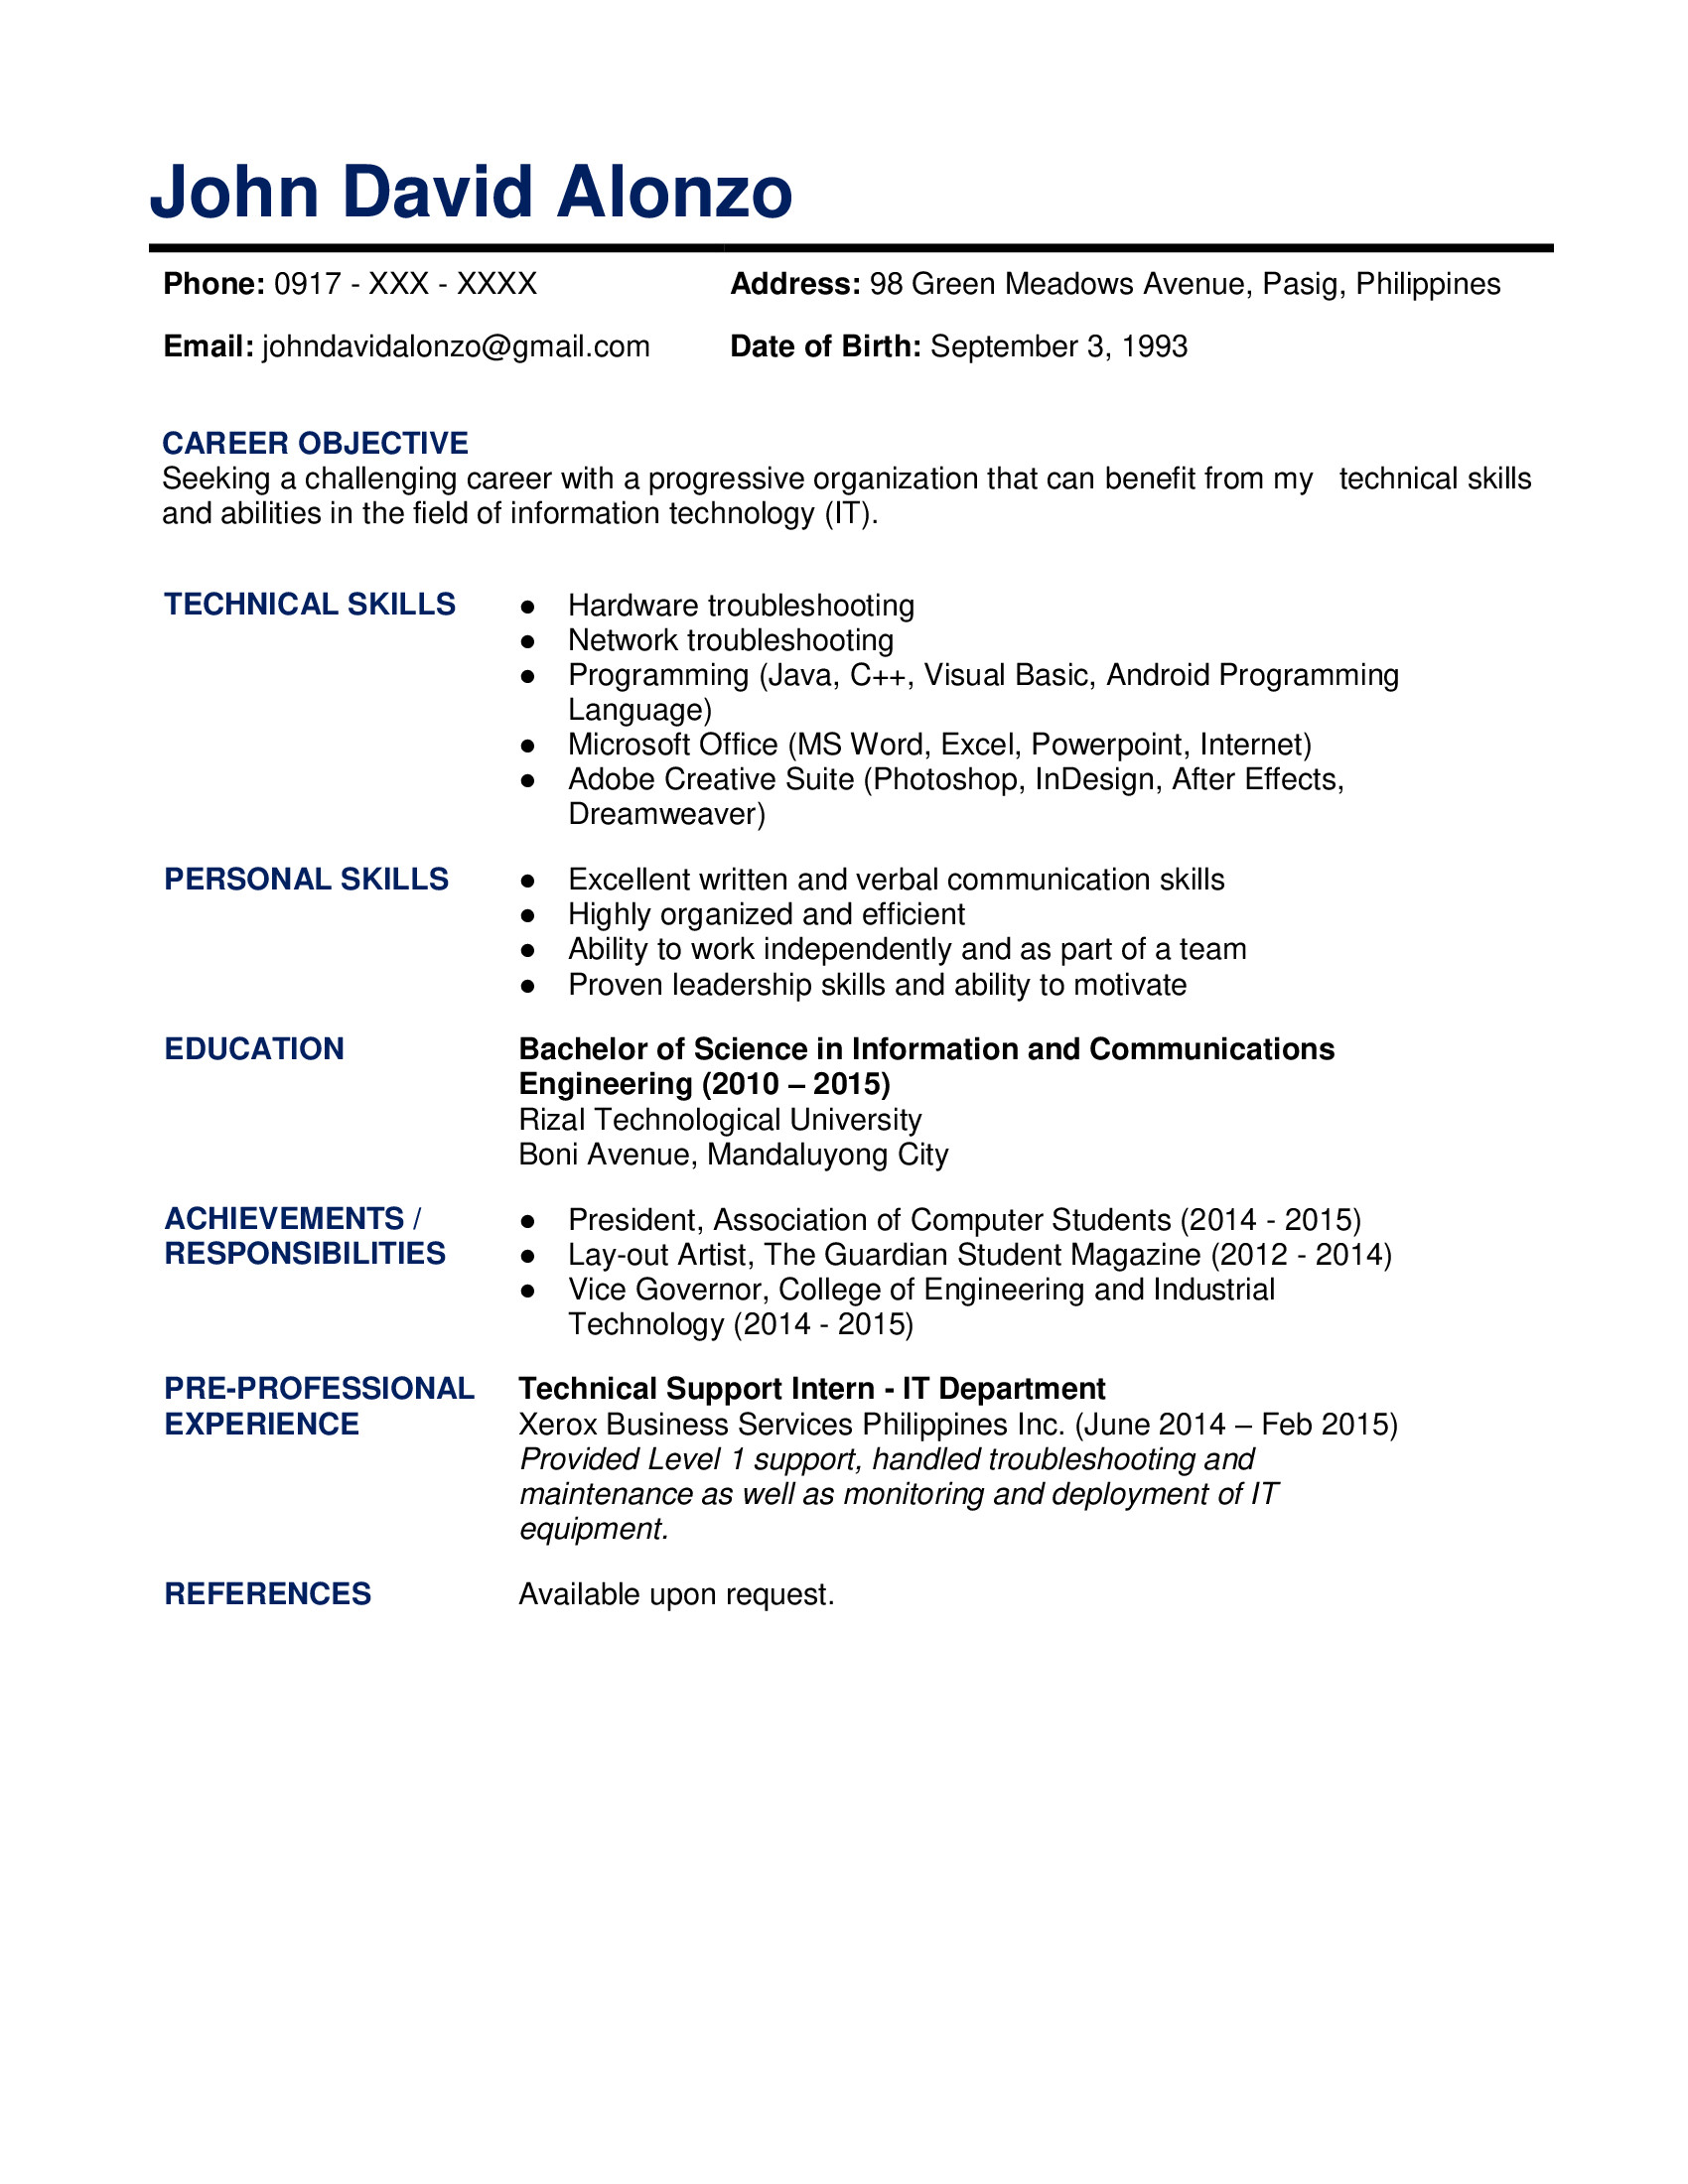 Resume Sample for Students Still In College Philippines Sample Resume formats for Fresh Graduates